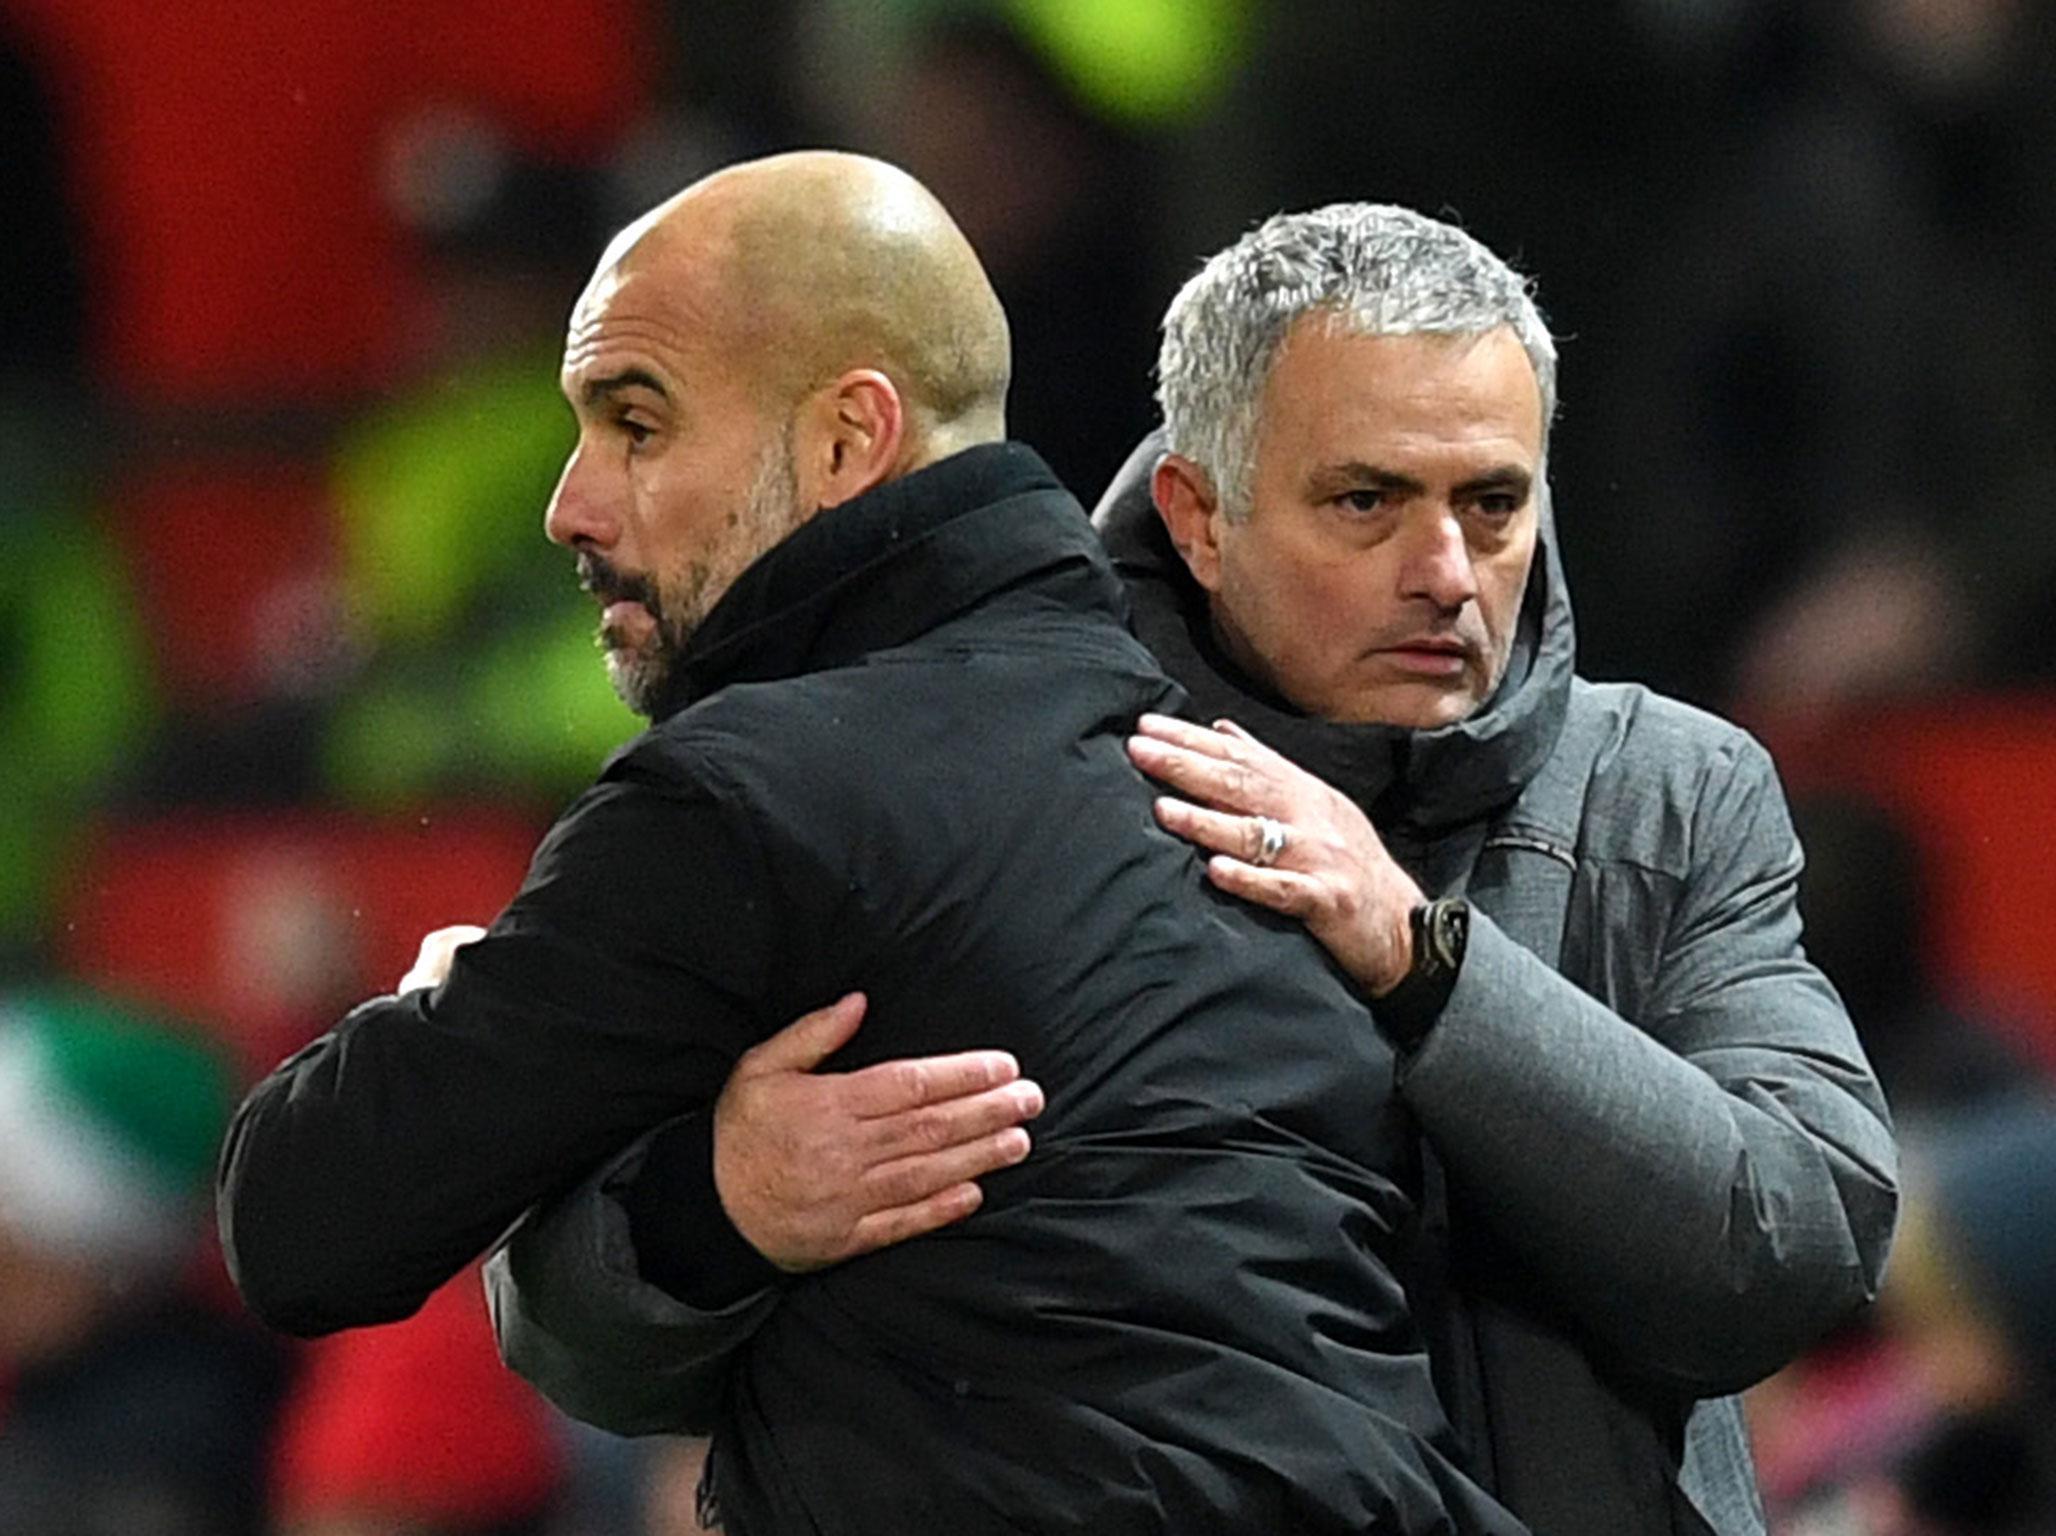 Jose Mourinho and Pep Guardiola is a one-sided rivalry - where one has